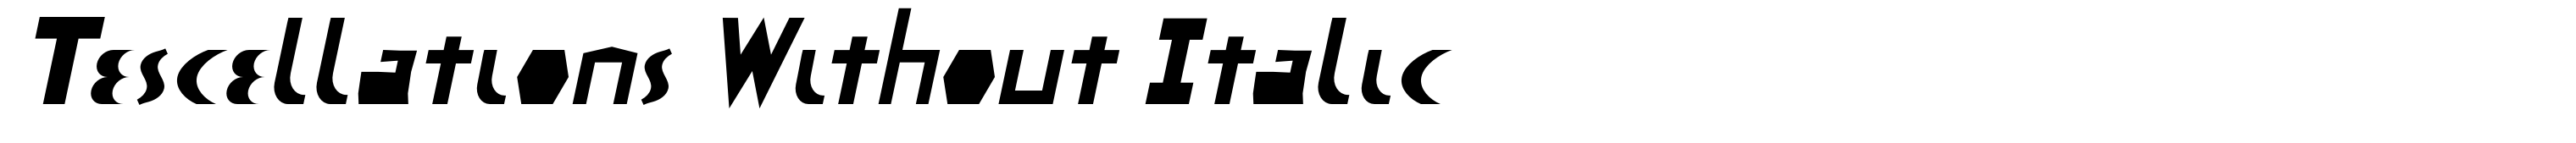 Tescellations Without Italic